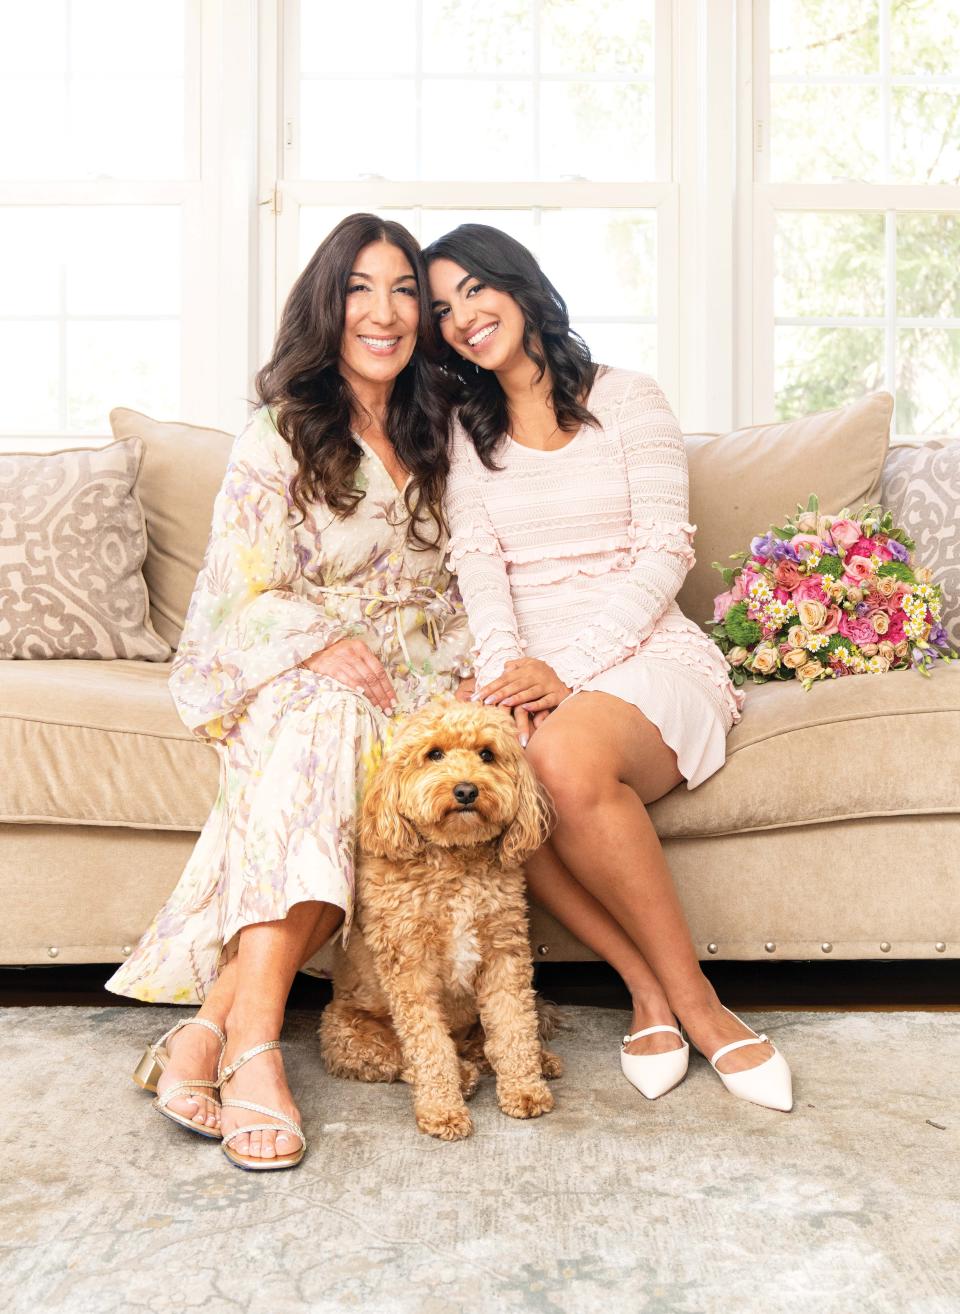 Angela Thomas with her daughter Maia German and thier dog Carti pose in their Englewood home; 

Creative direction and styling by Colleen Daly-Schuh; Hair by Bob Press, Kayla Press Sagliocca, and Ariana Jimenez — makeup by Besarta Dedushaj, Changing Heads Salon